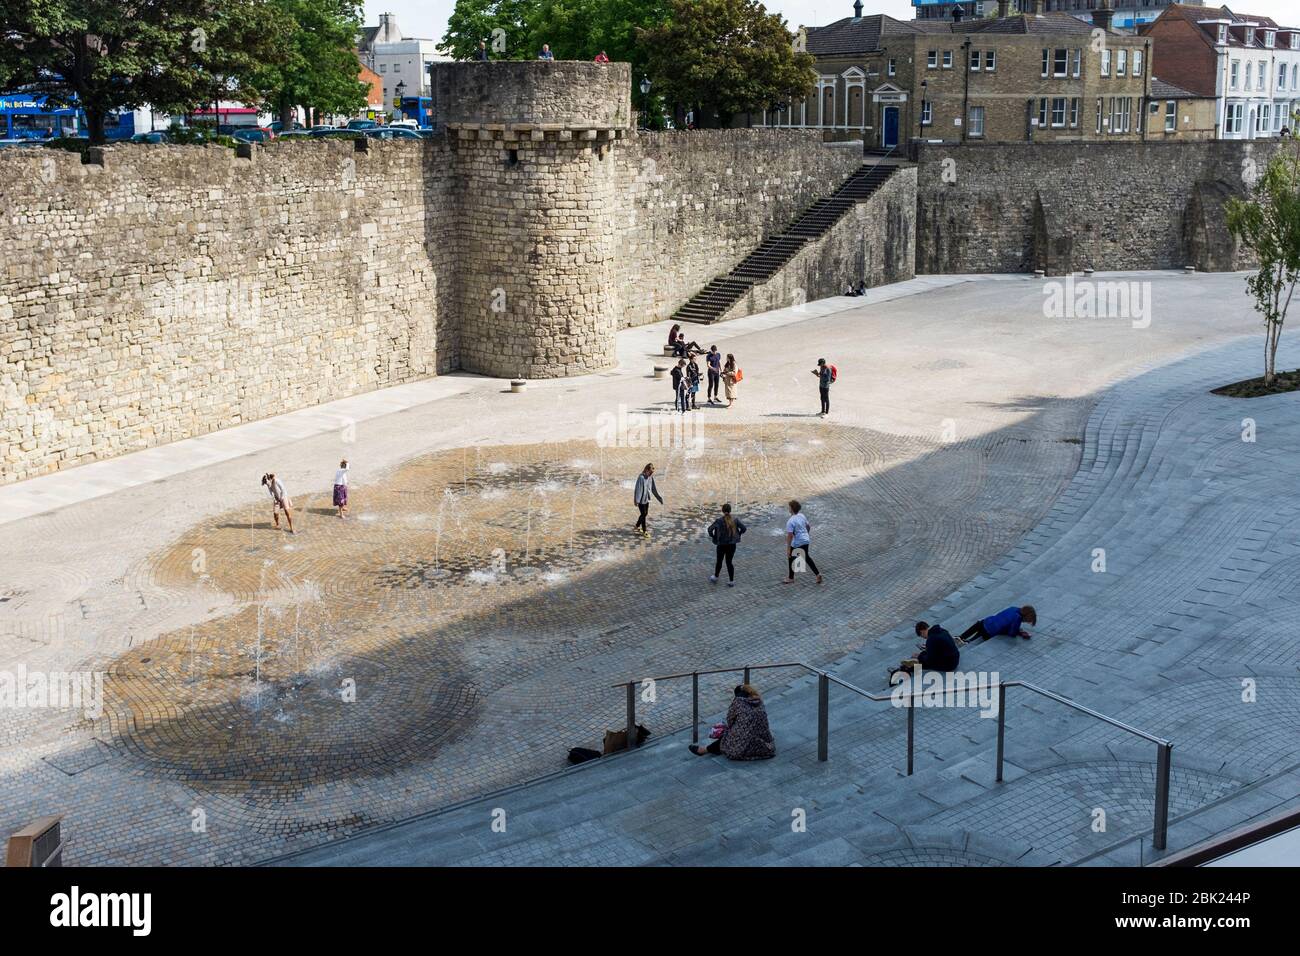 People enjoying warm weather in open space by Old Town Wall, Southampton, Hampshire, UK Stock Photo